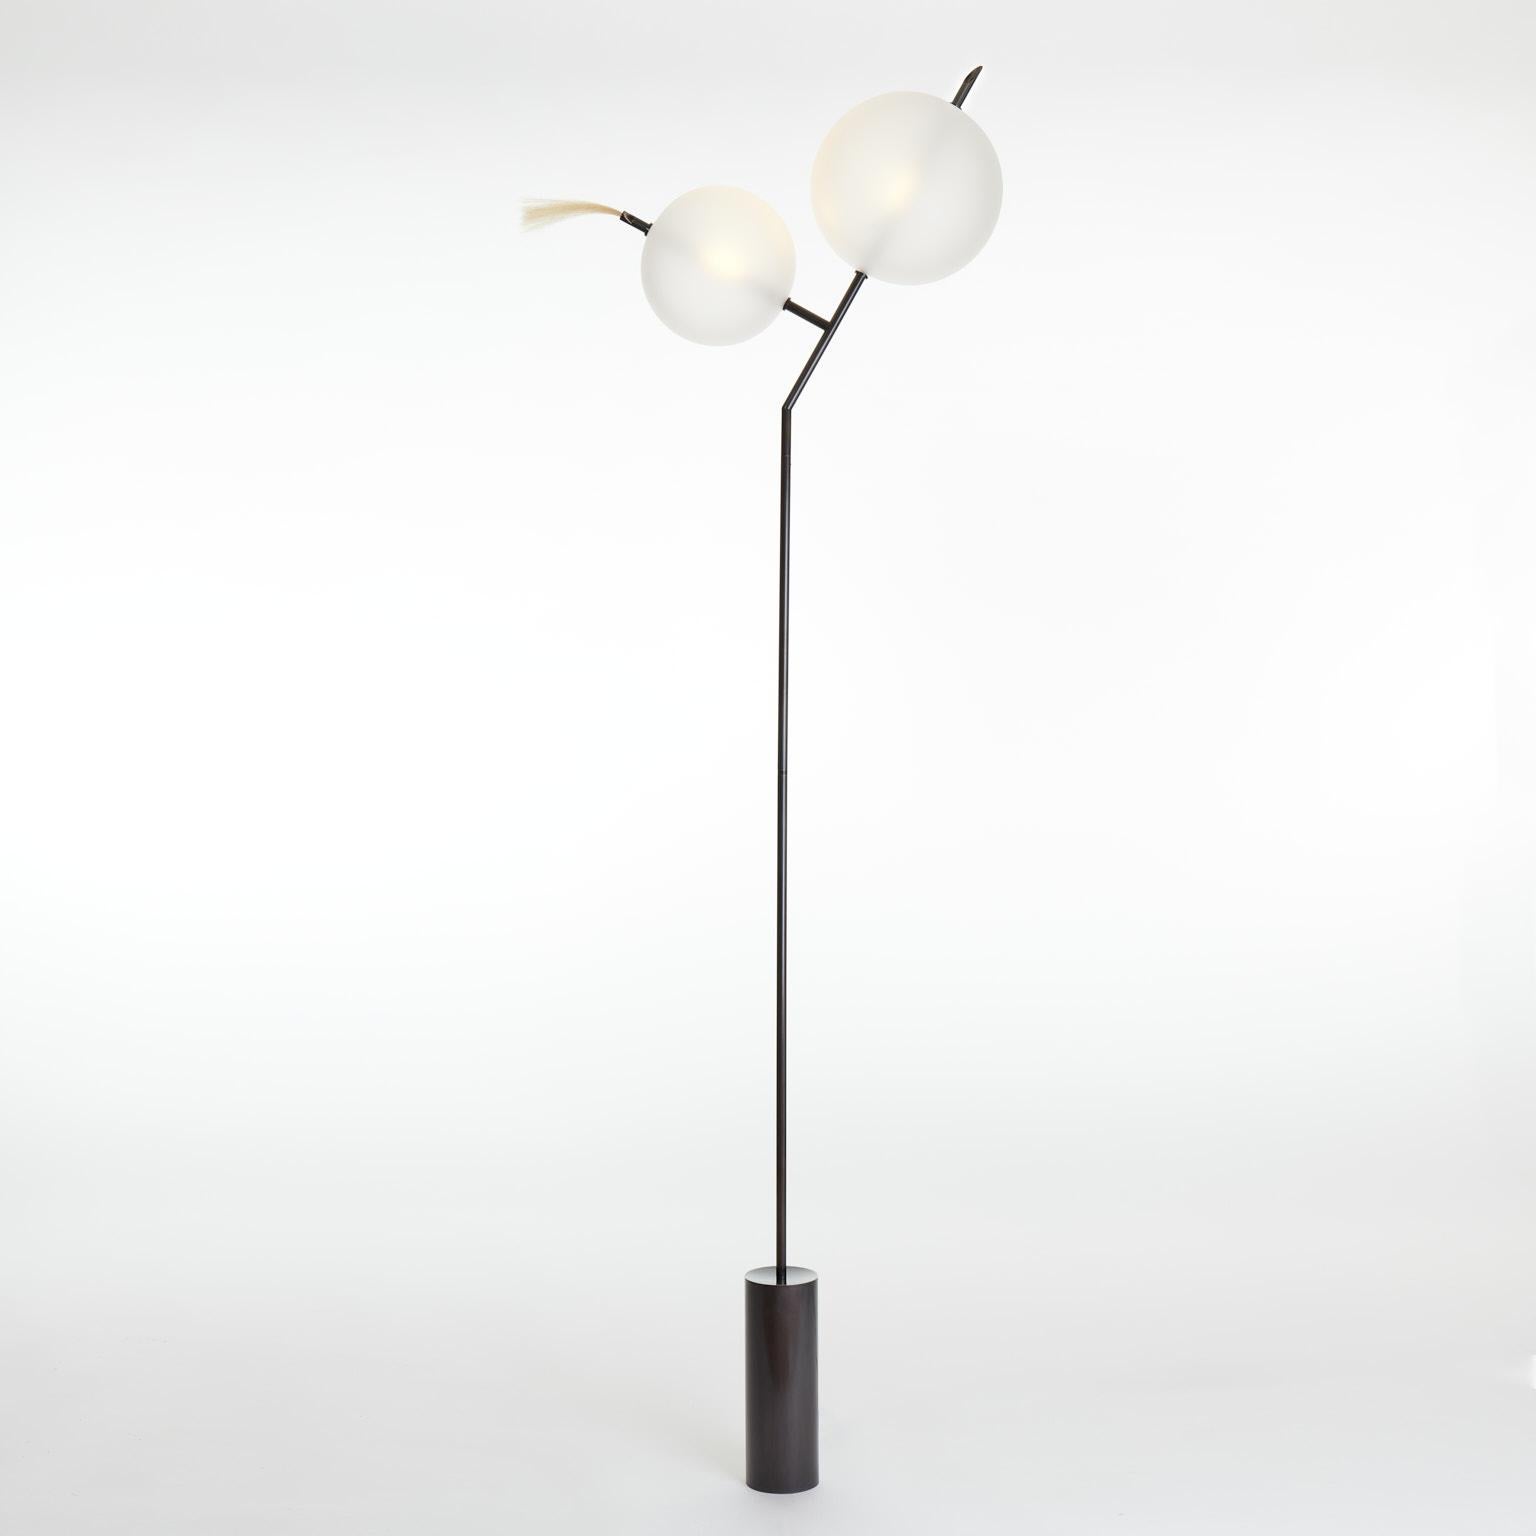 A playful nod, as the name suggests, to the world of cartoons, Mickey floor light is a Minimalist contemporary standing lamp composed of two closely positioned glass spheres of different sizes.
As an option, on request, the horsehair detail can